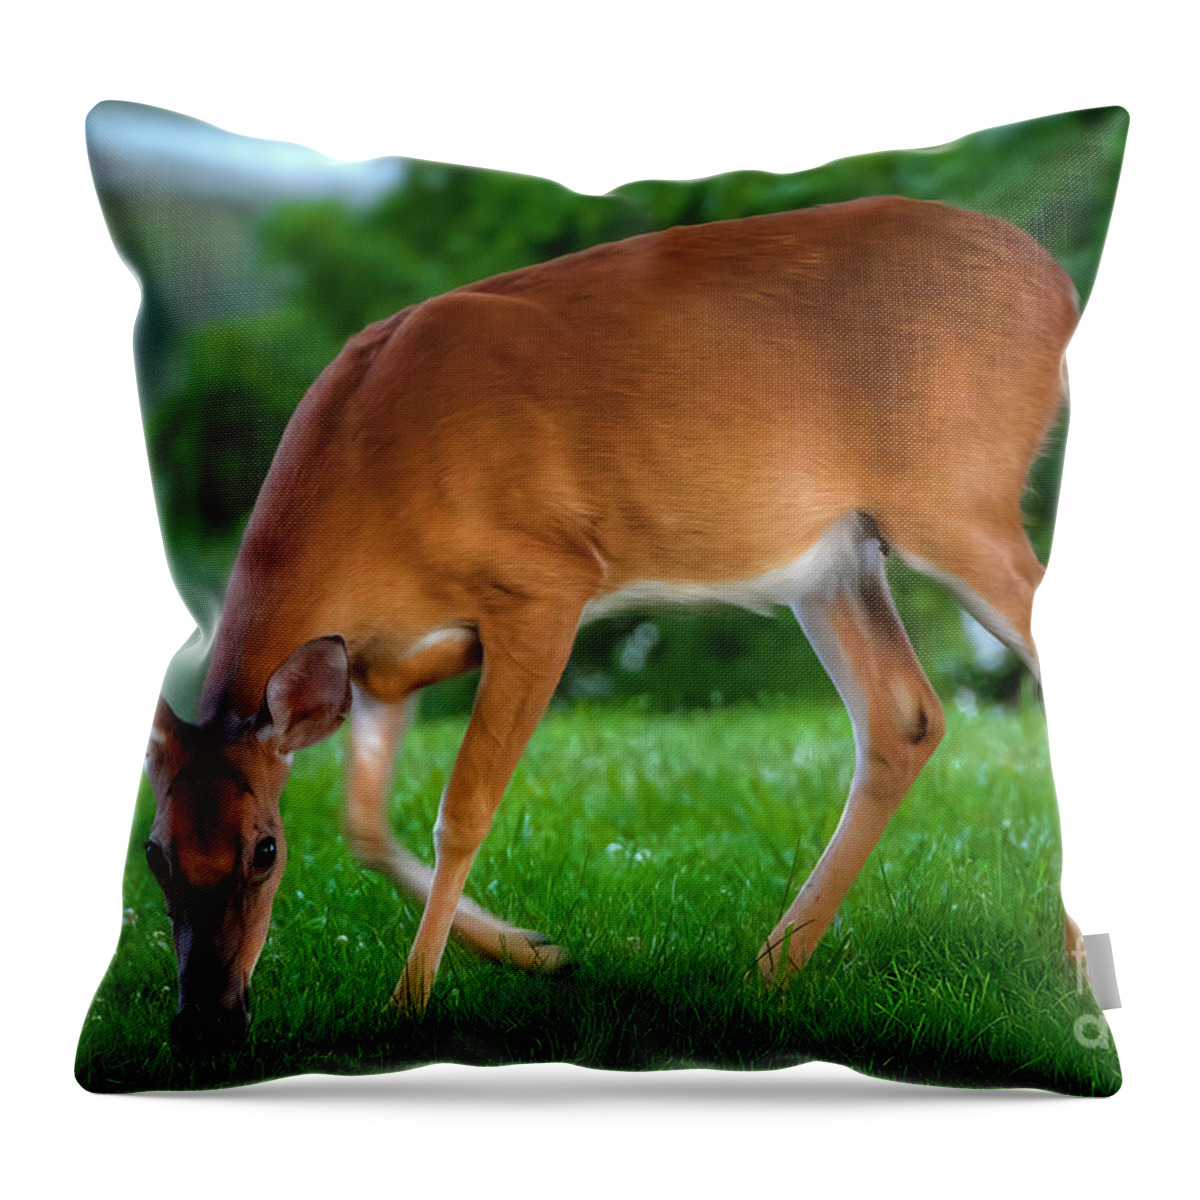 Deer Throw Pillow featuring the photograph The Deer by Shelia Hunt